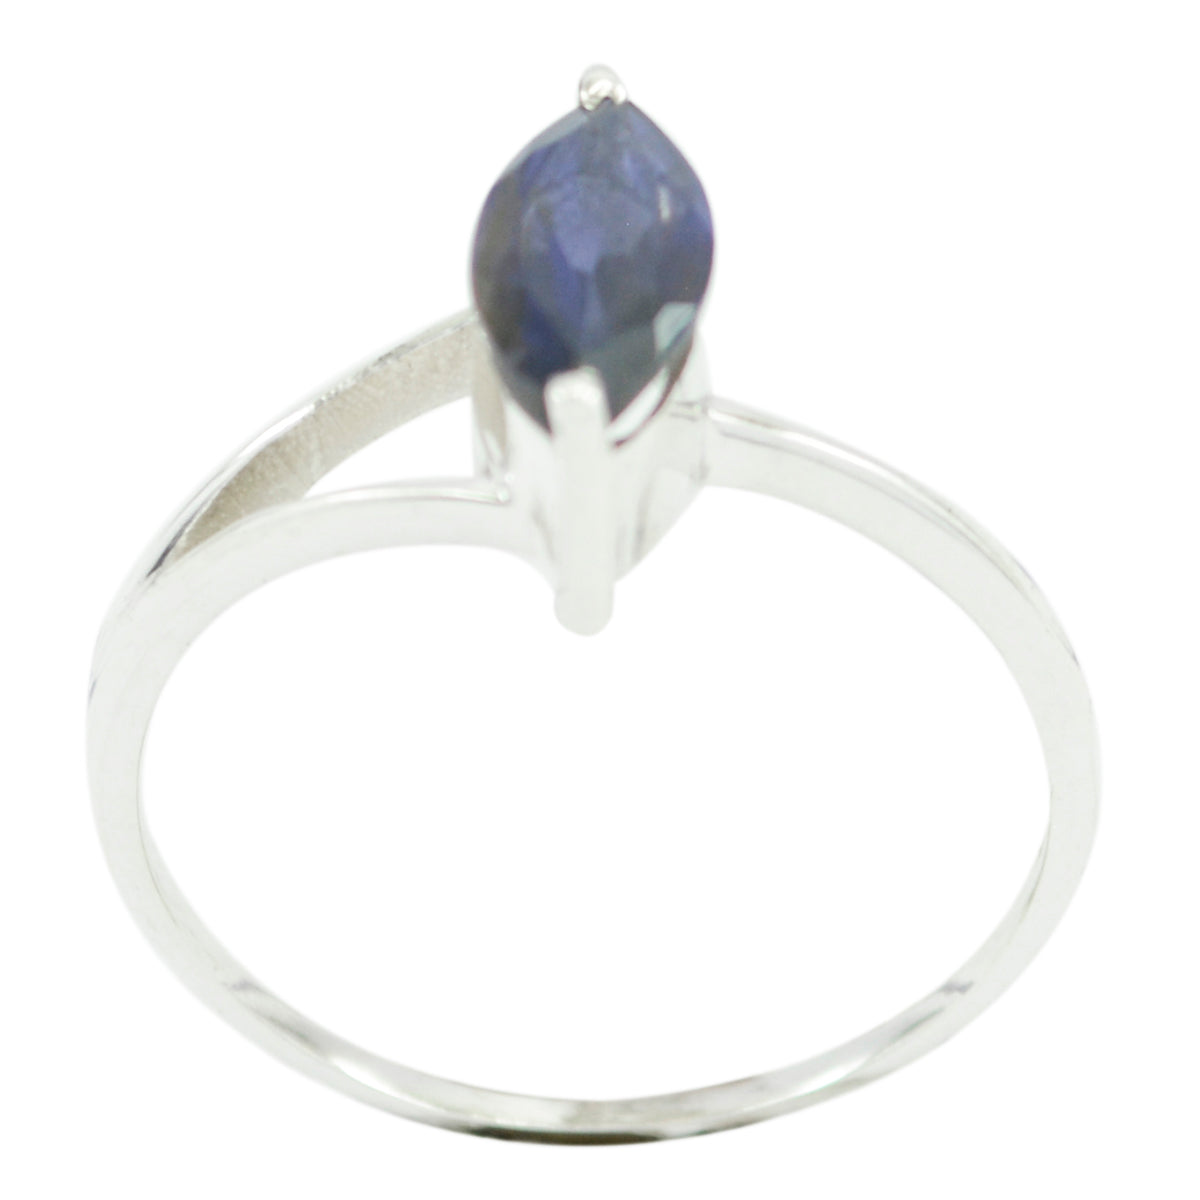 Riyo Well-Favoured Gem Iolite Solid Silver Ring Open Heart Jewelry